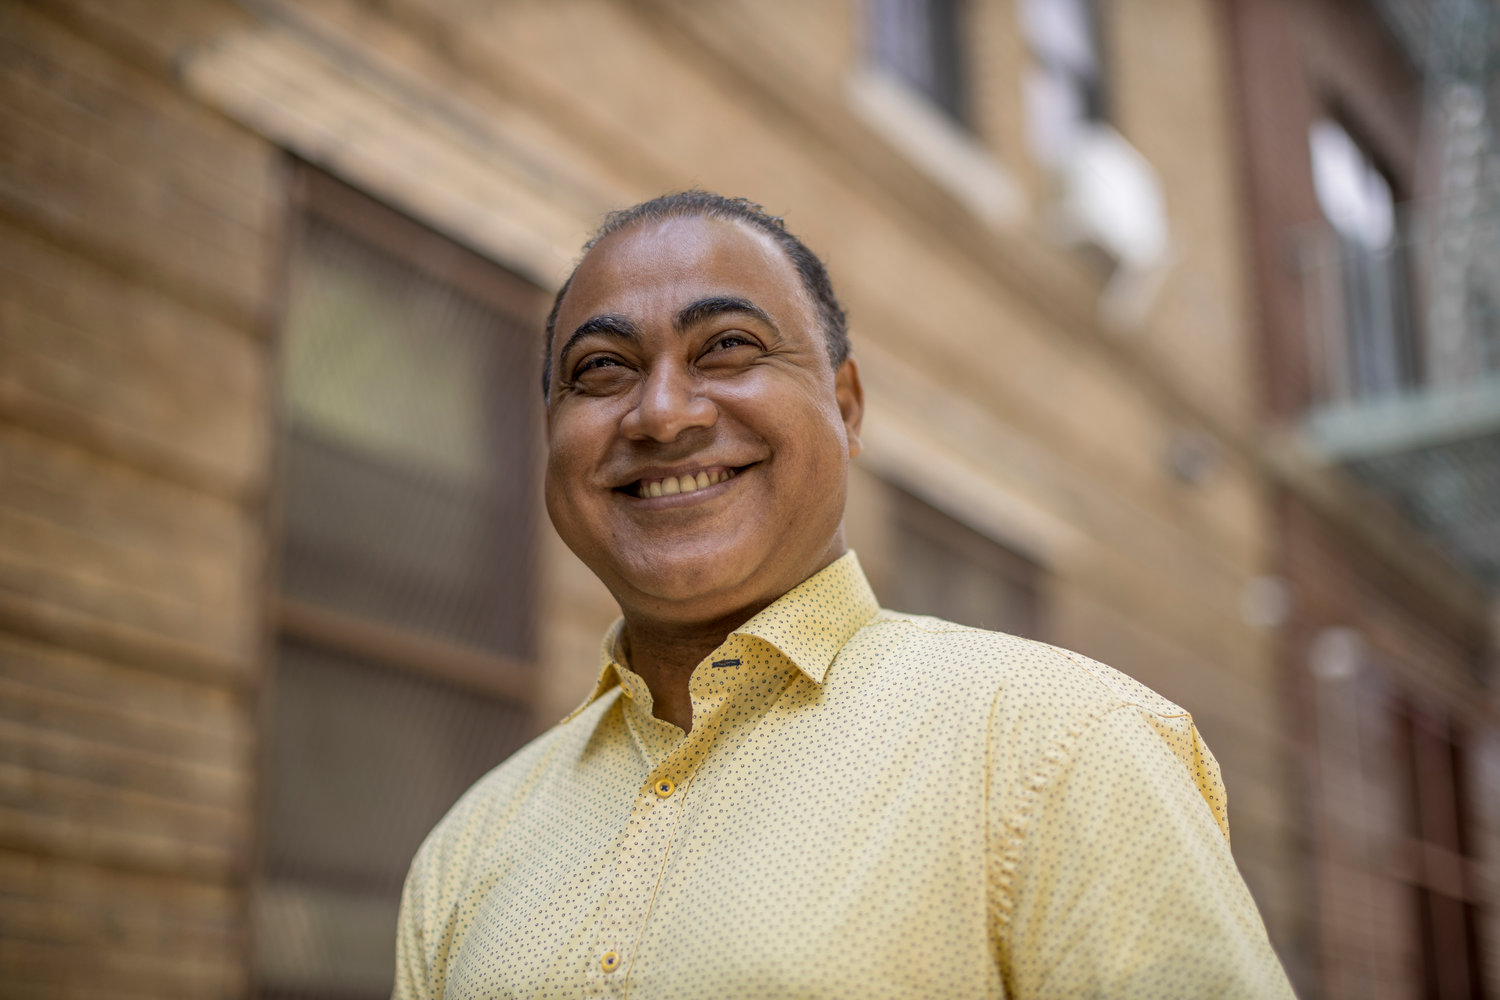 A former reporter and press secretary in the state attorney general’s office, Fernando Aquino is one of five candidates running for the city council seat currently held by Fernando Cabrera.